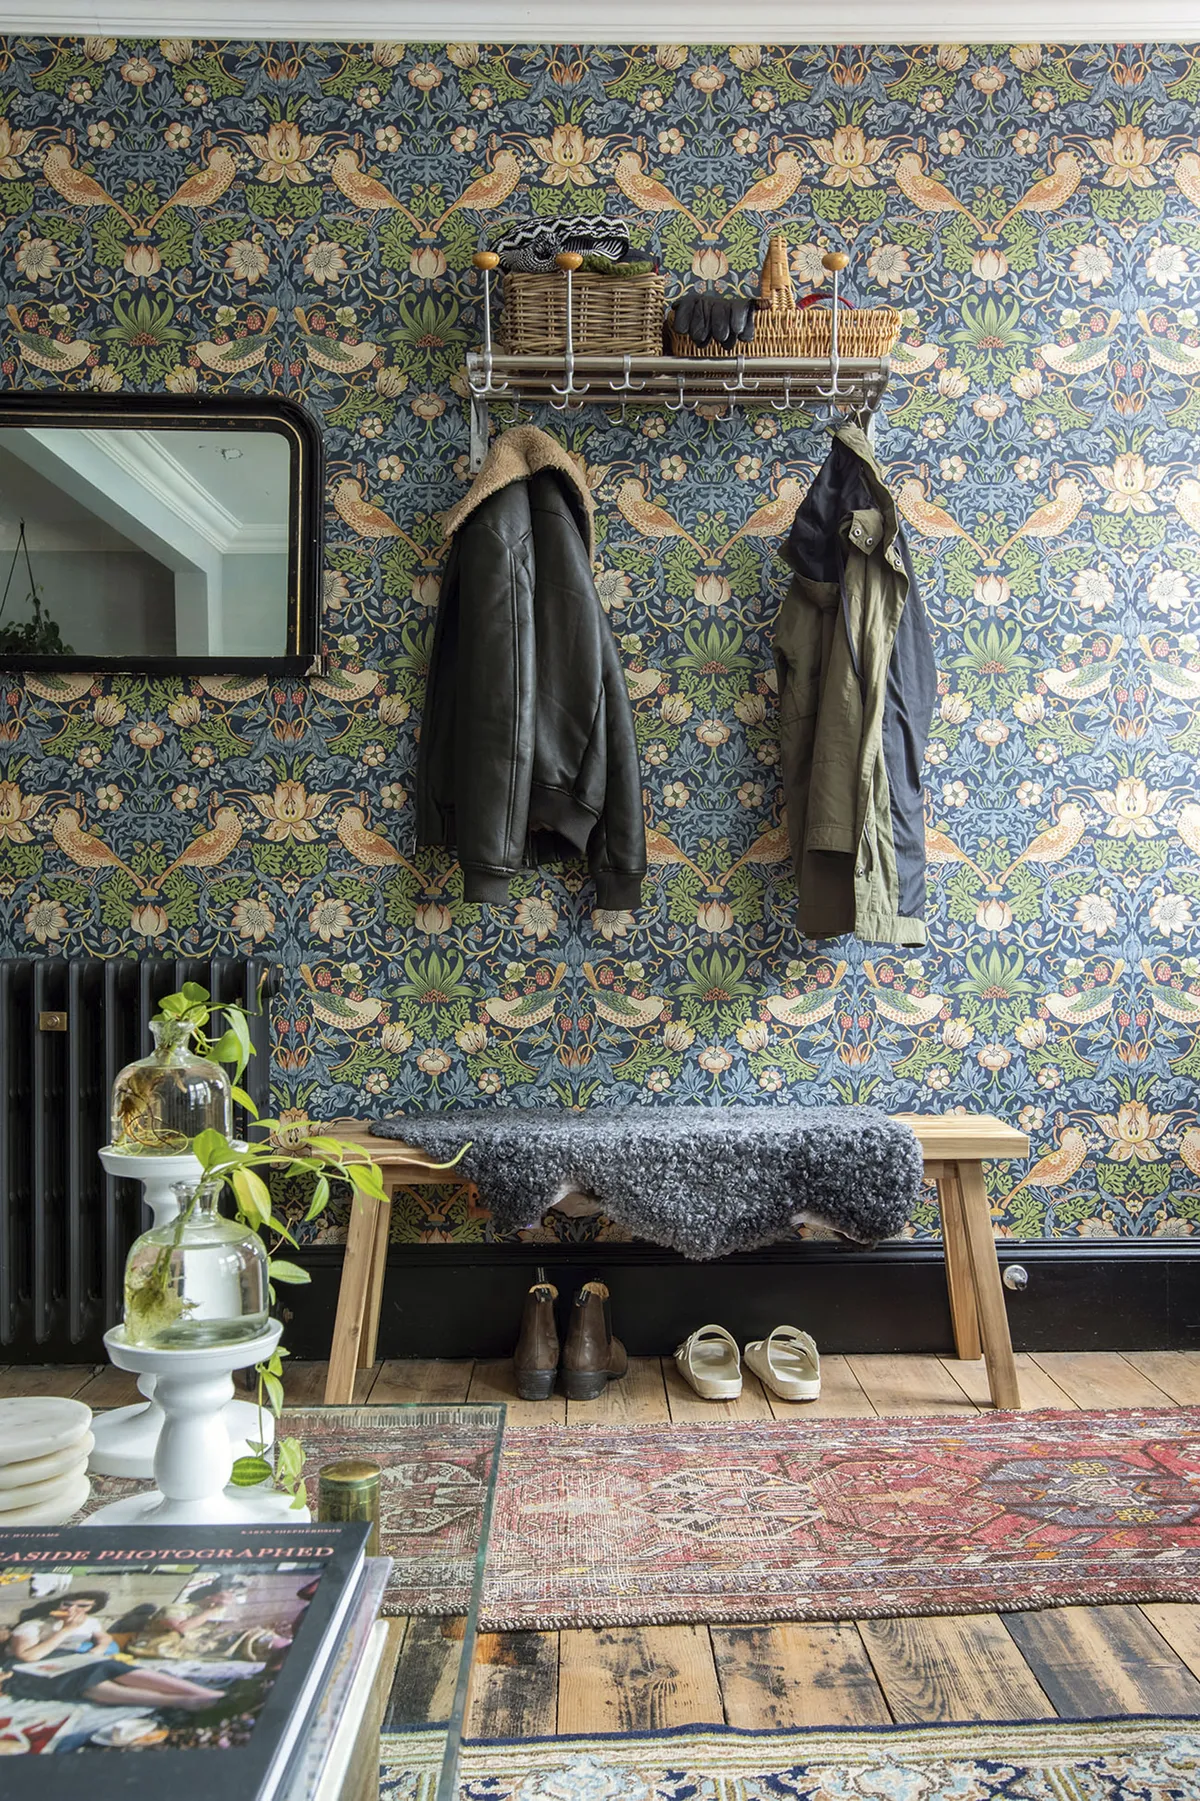 In the hallway, William Morris’s Strawberry Thief wallpaper sets the tone for a bold, design-led house. A vintage coat stand from Johan’s parents is complemented by an IKEA bench and Swedish sheepskin